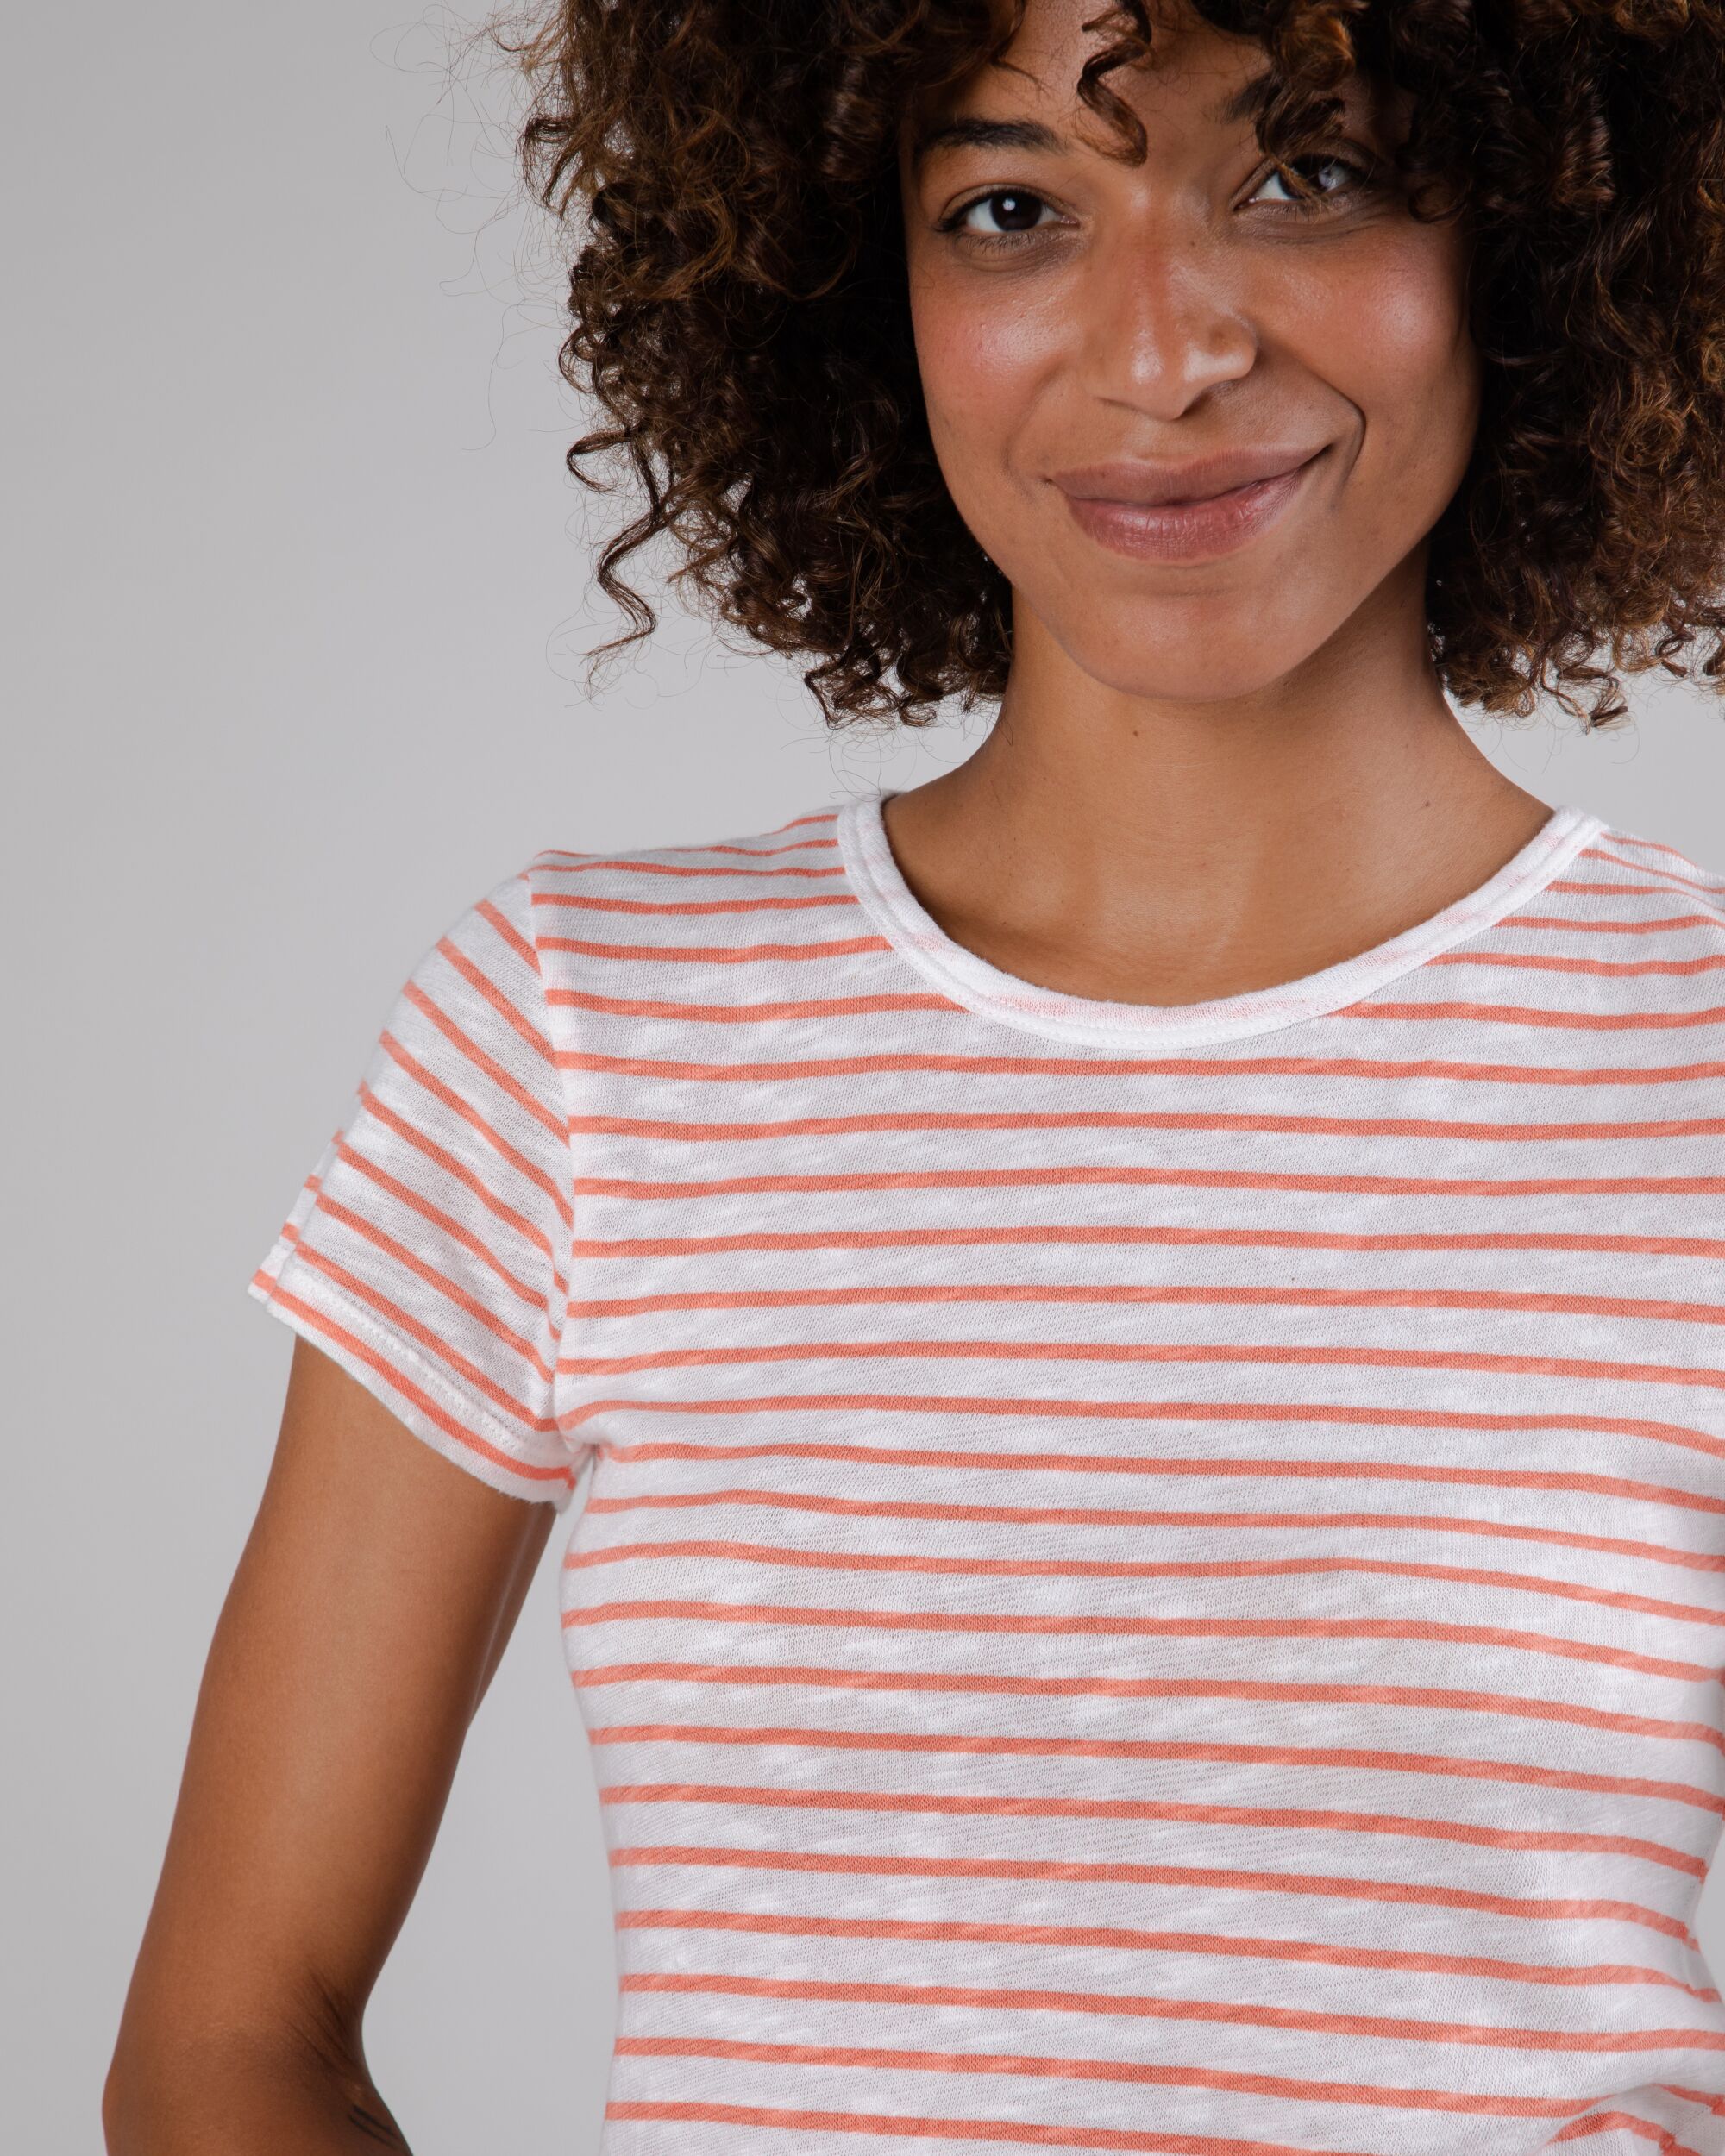 T-shirt Stripes in coral-white stripes made from organic cotton from Brava Fabrics